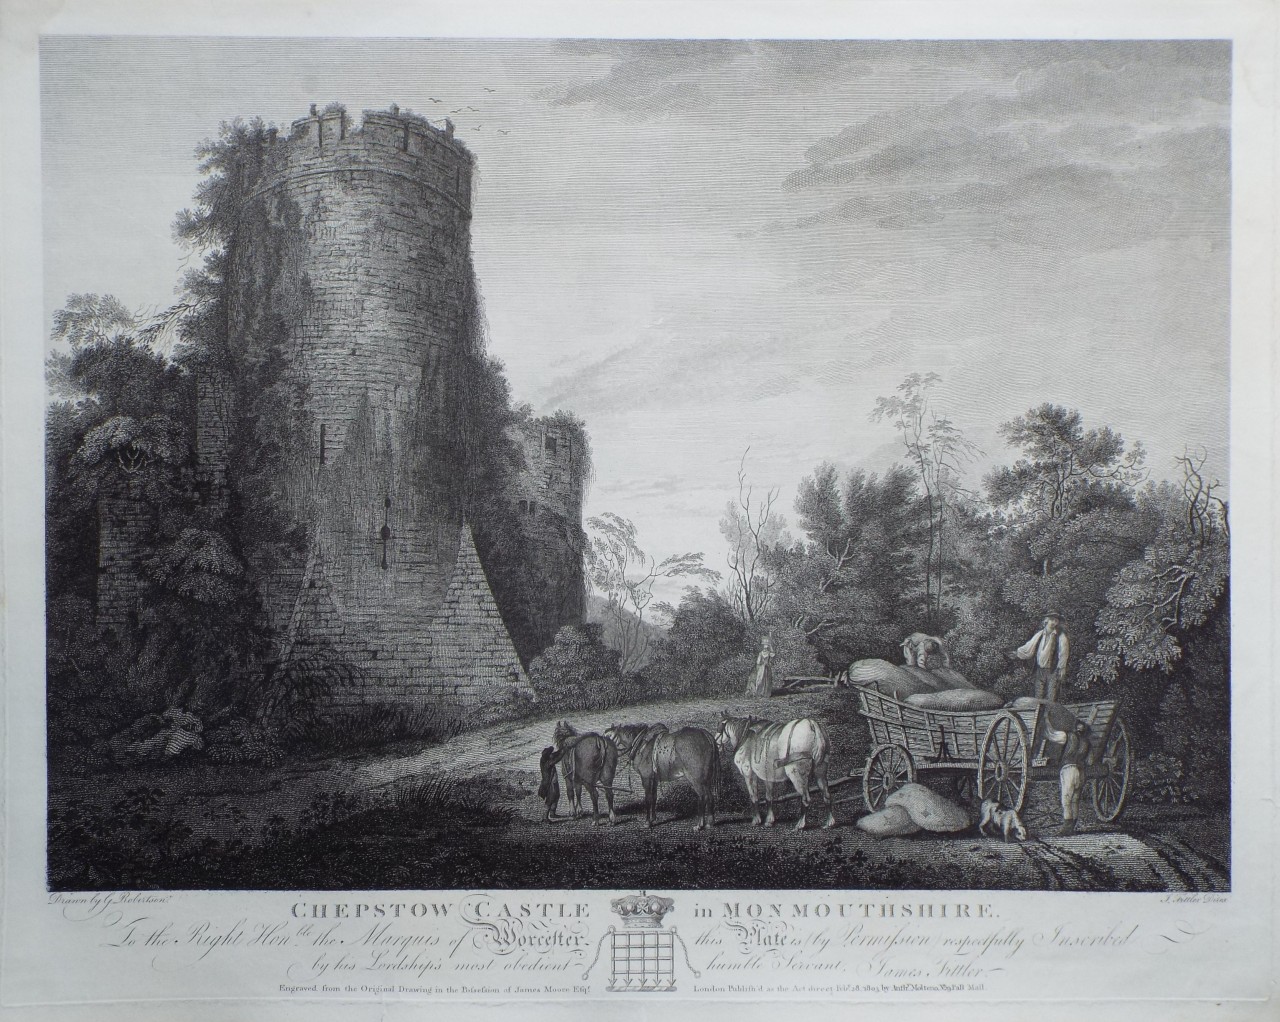 Print - Chepstow Castle in Monmouthshire. To the Right Hon.ble the Marquis of Worcester, this Plate is (by Permission) respectfully Inscribed.
 - Fittler